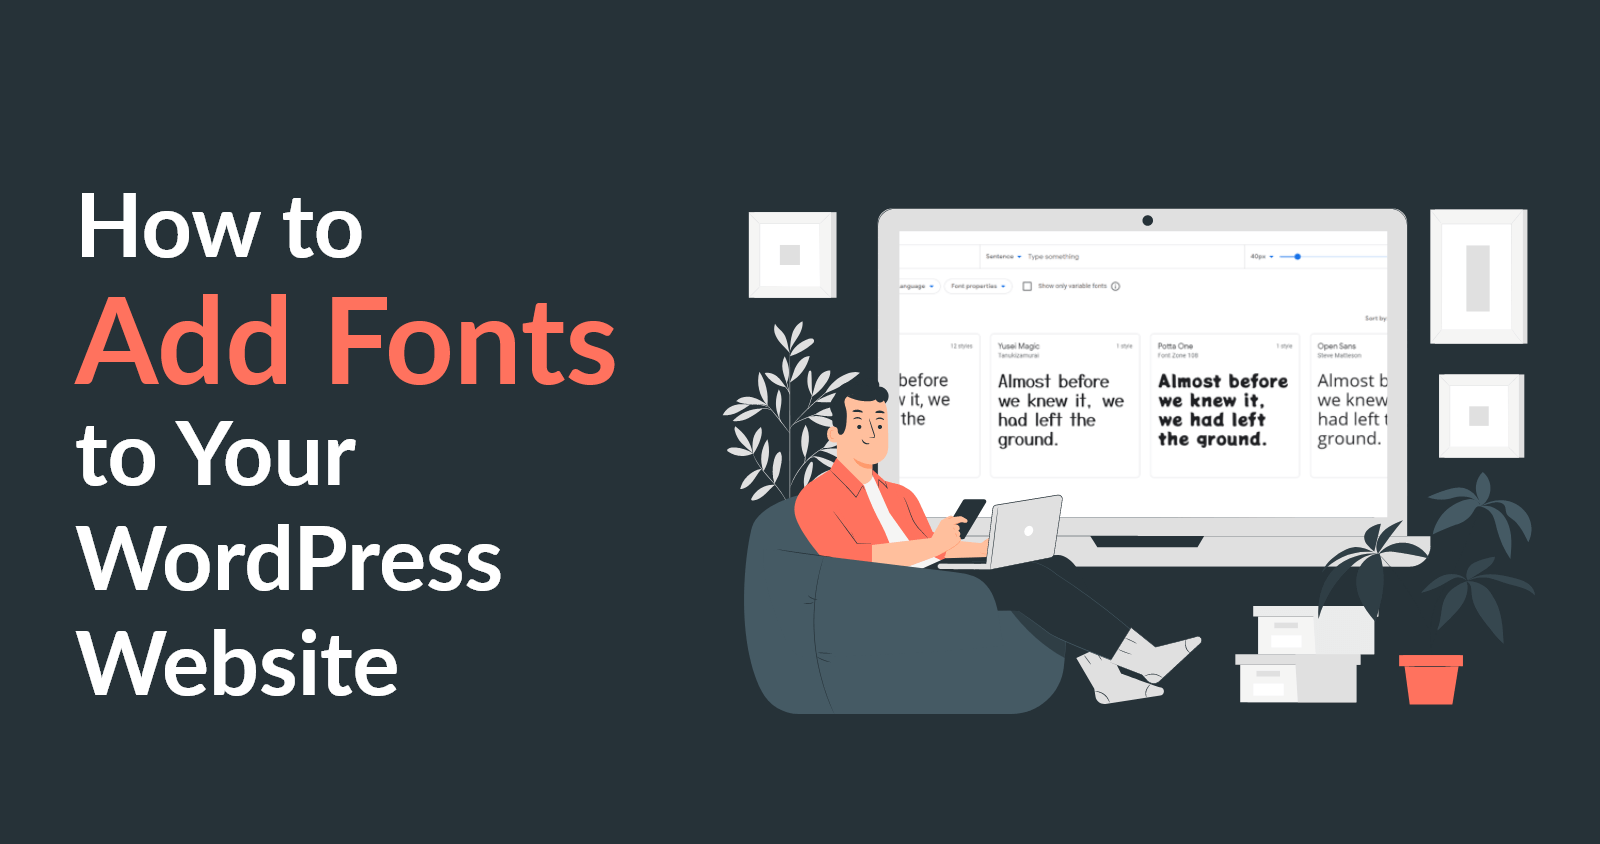 How to Add Fonts to Your WordPress Website